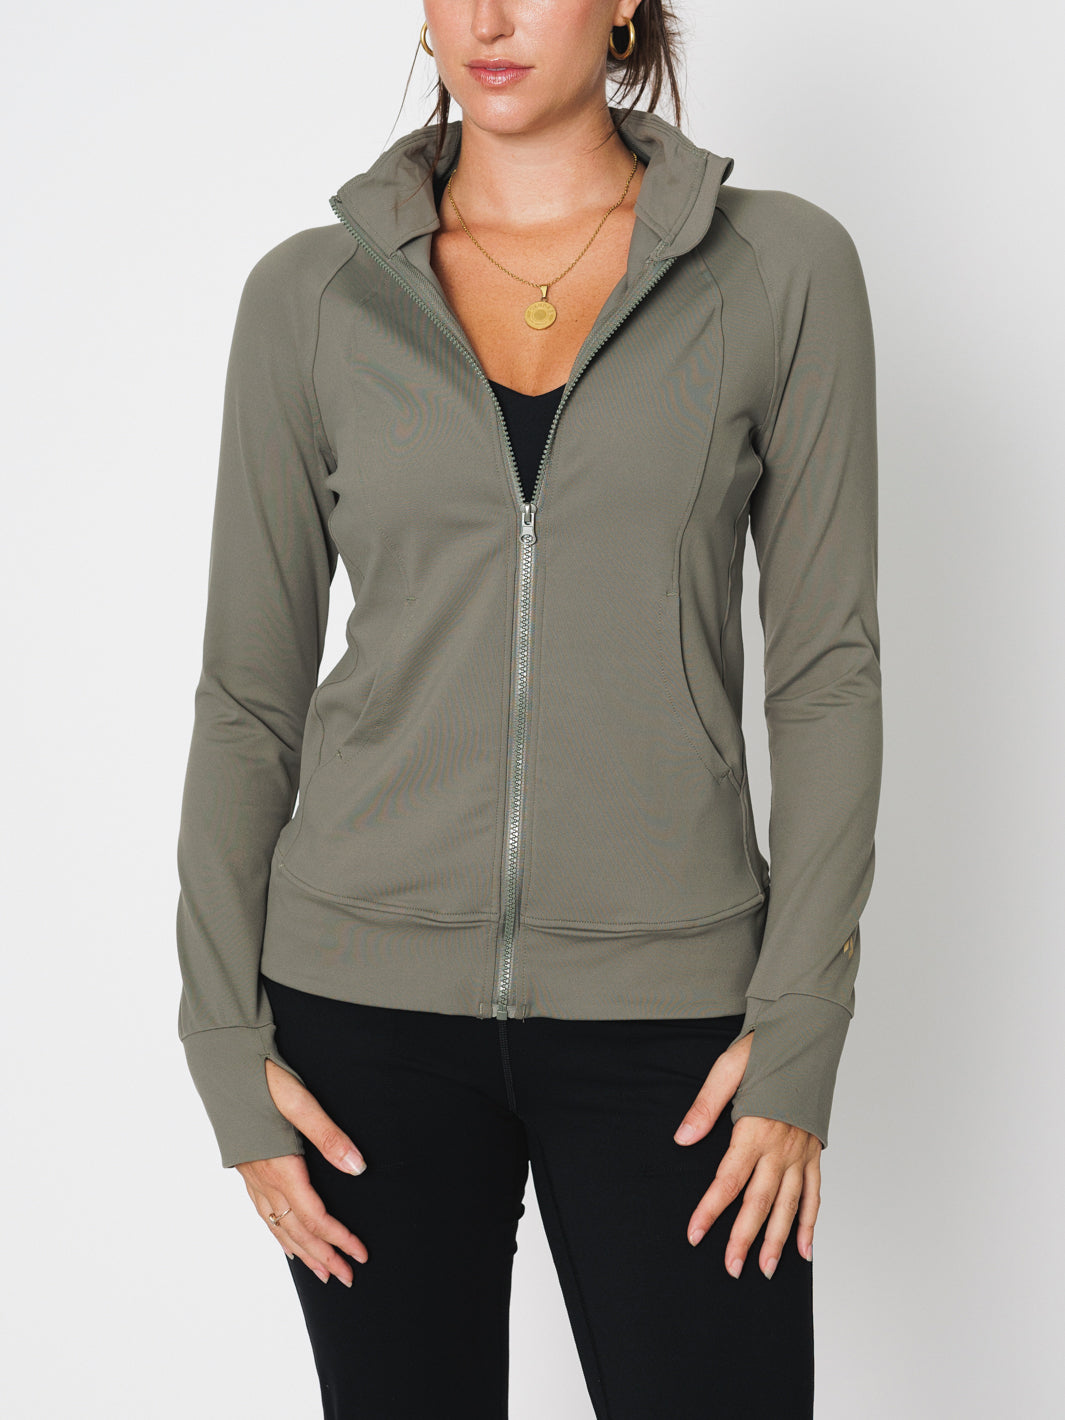 All Day Hustle Zip Front Jacket